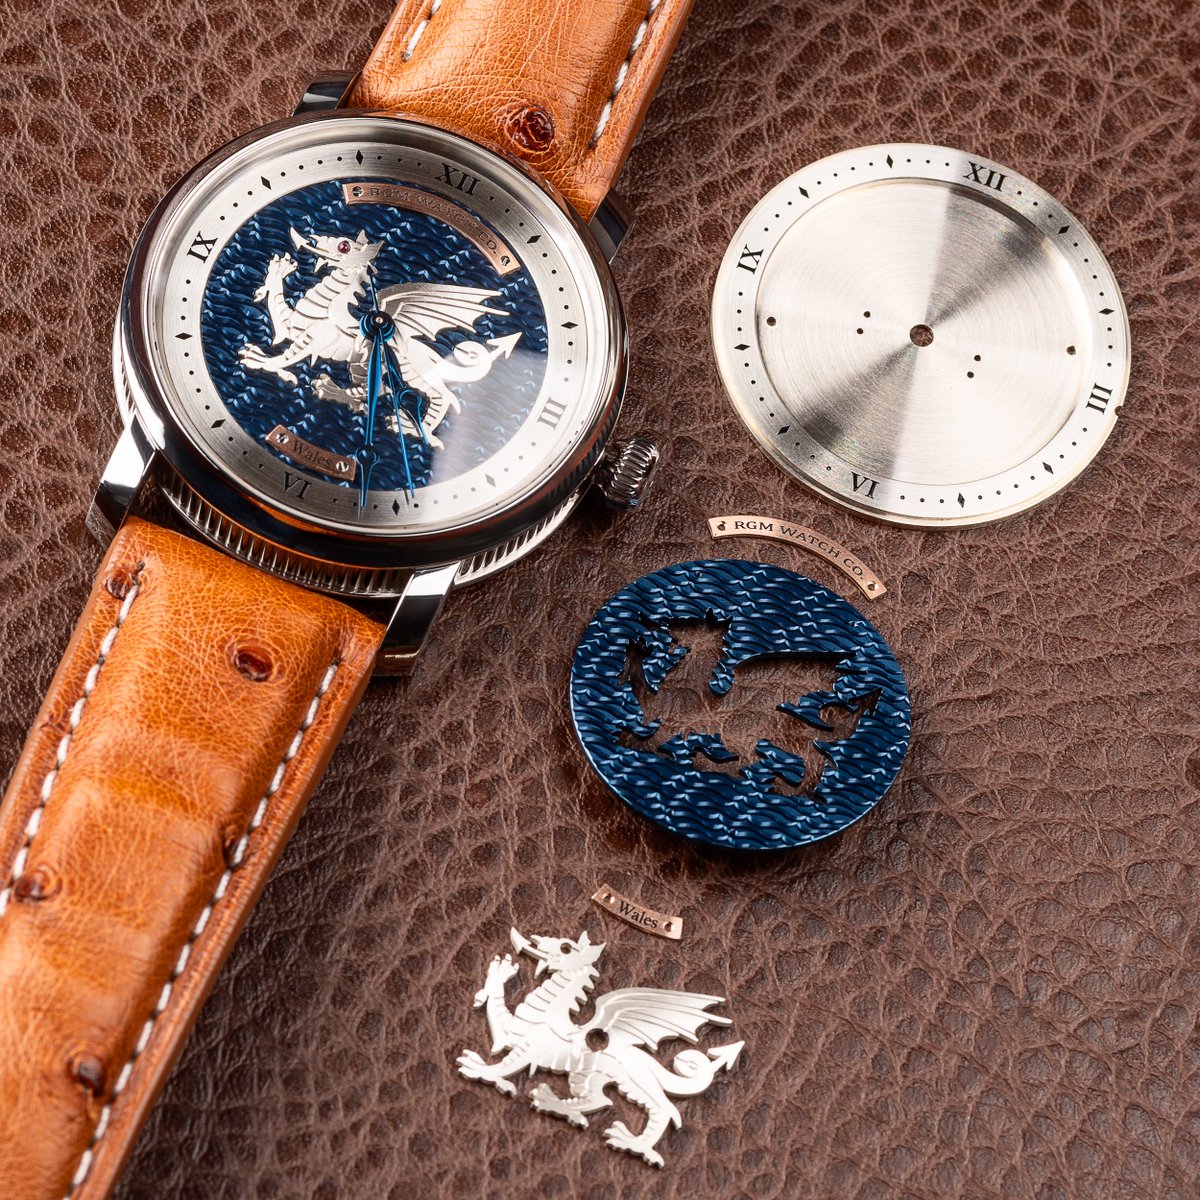 More details of the custom RGM featuring the Welsh Dragon.

#rgmwatchco #rgmwatches #rgmwatch #watches #wristwatch #wristwatches #watchmaking #watchmaker #independentwatchmaking
#guilloche #guillochedial #engineturning #engineturneddial #bespokewatch #customwatch #welshdragon